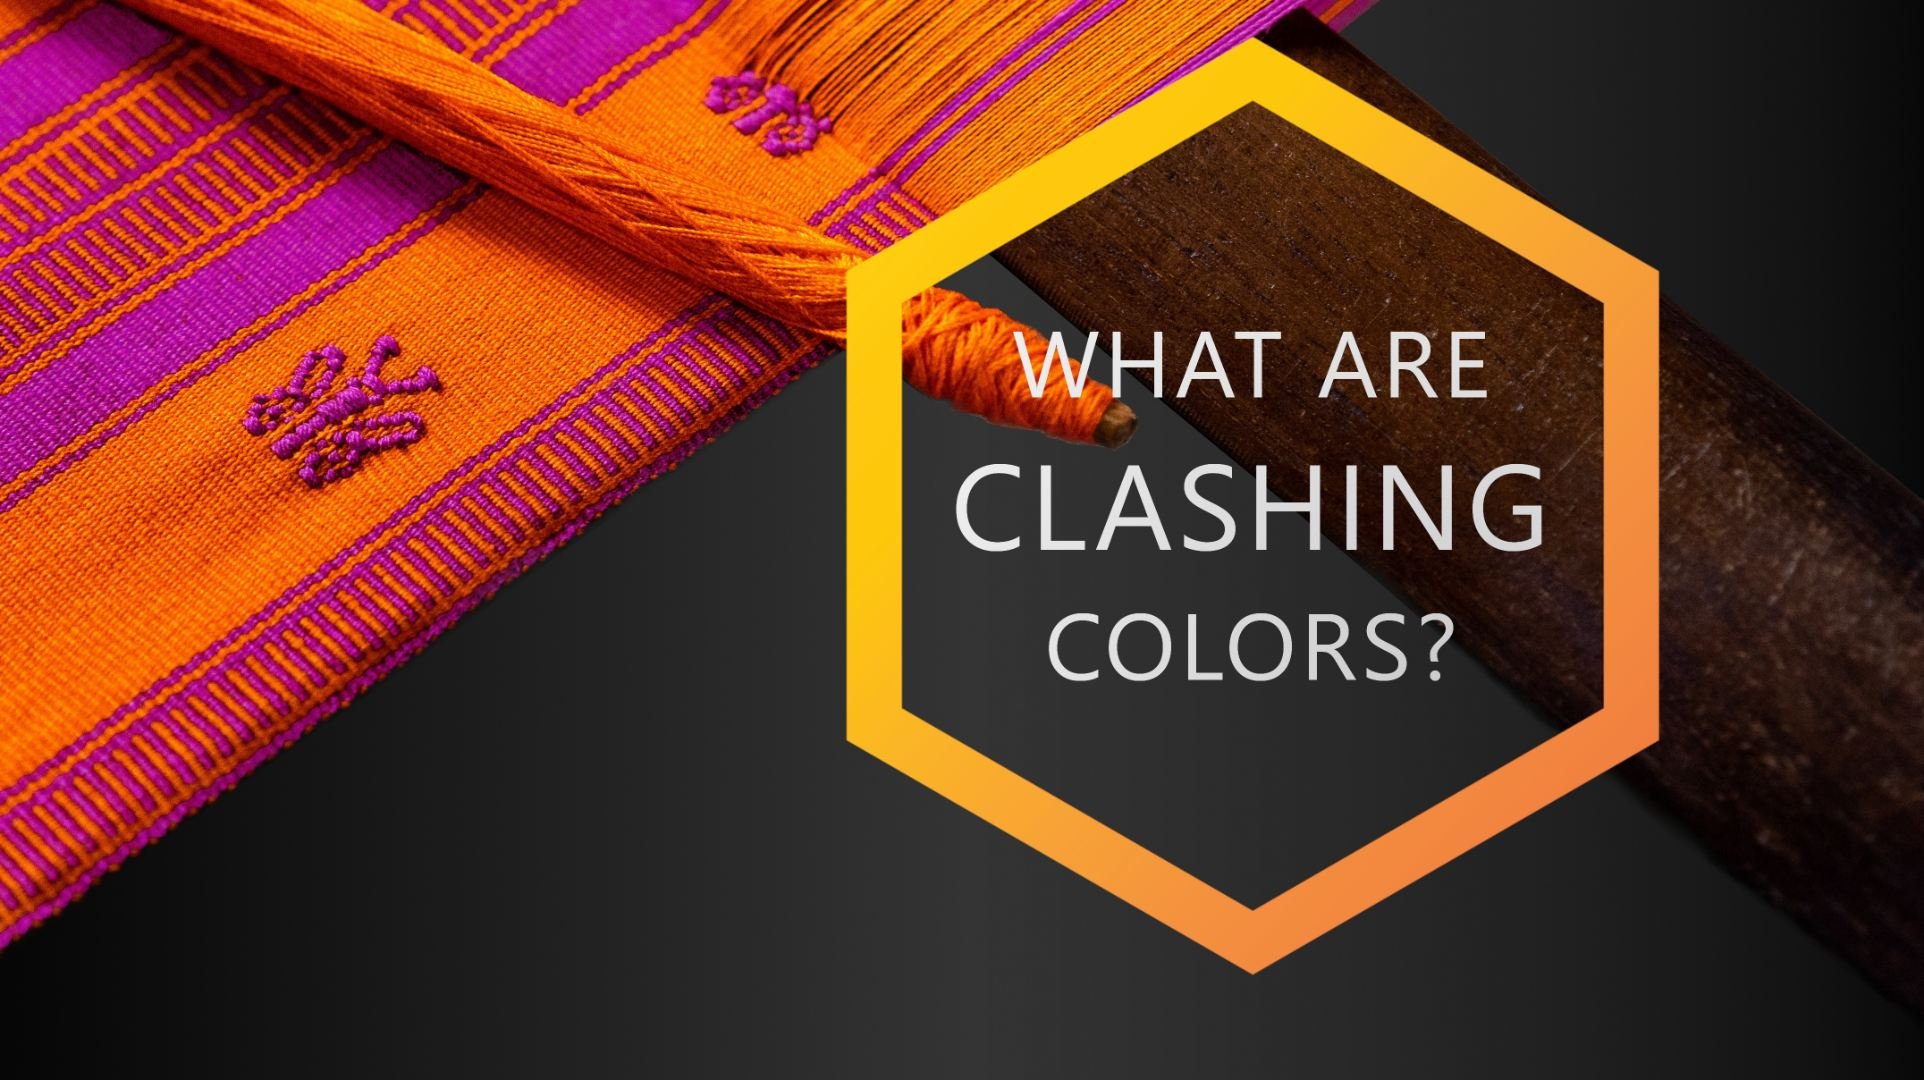 What are clashing colors and why do they clash?